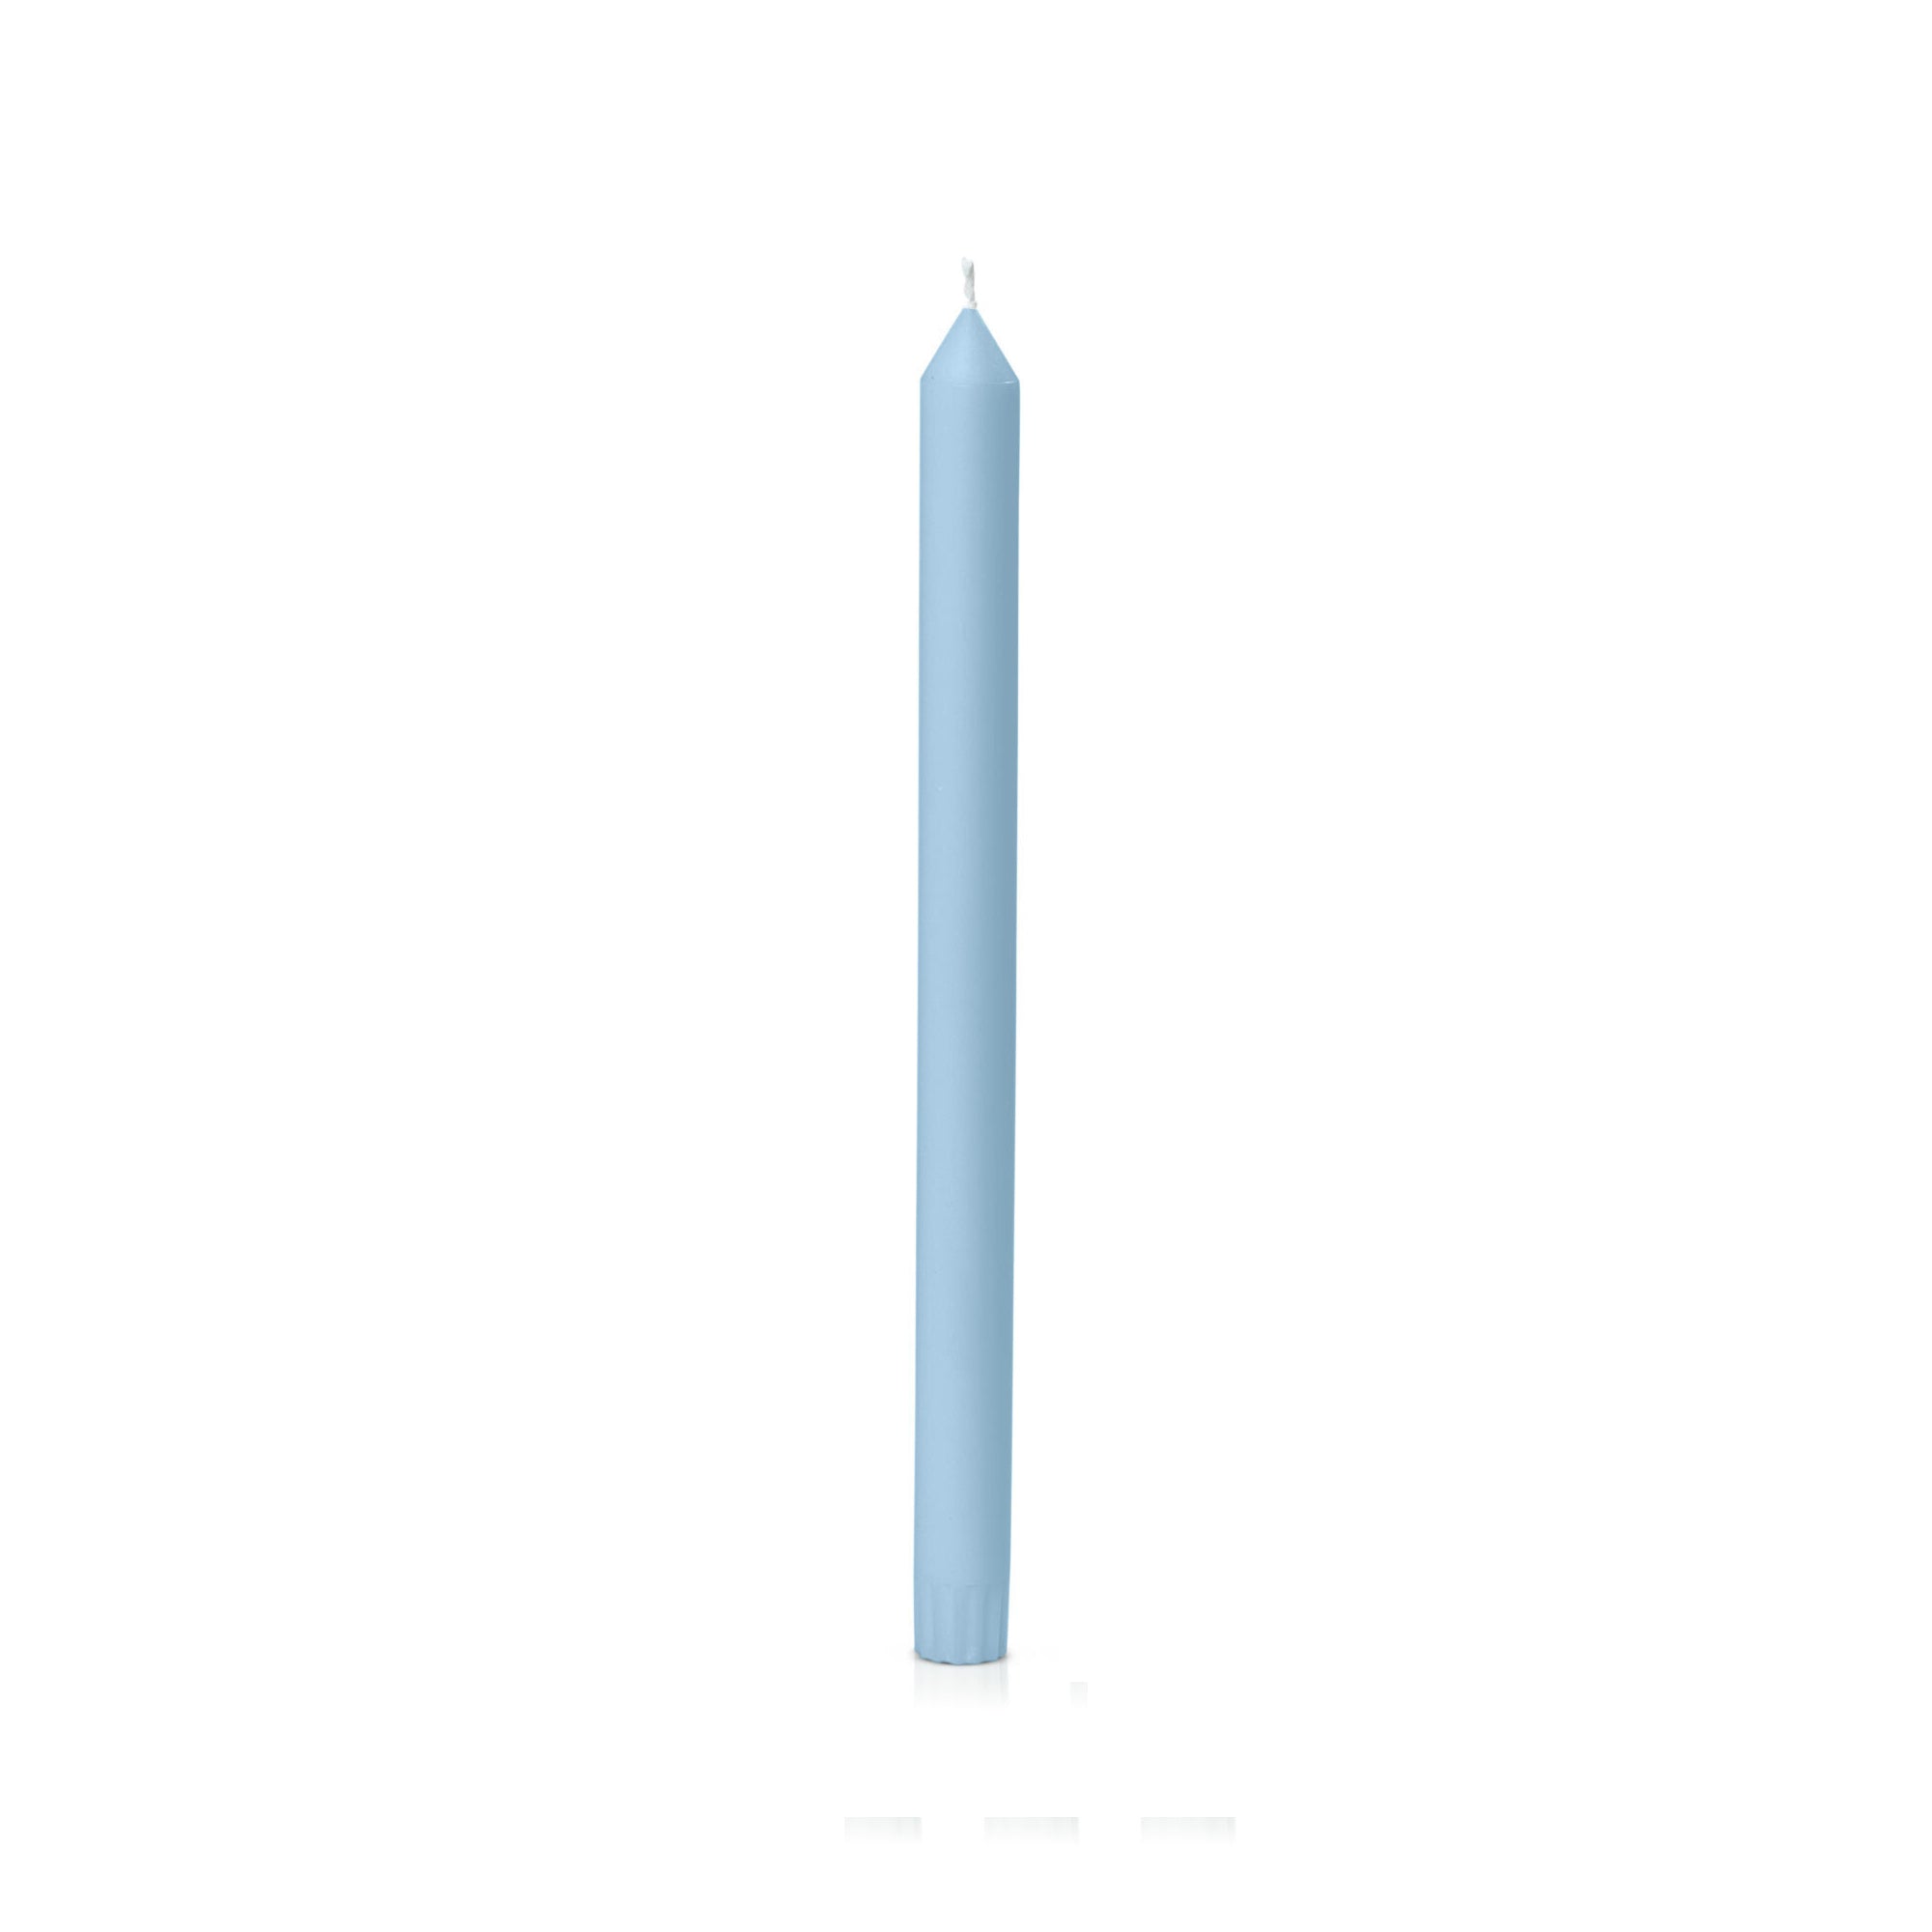 Moreton Eco Dinner Candle 30cm - French Blue